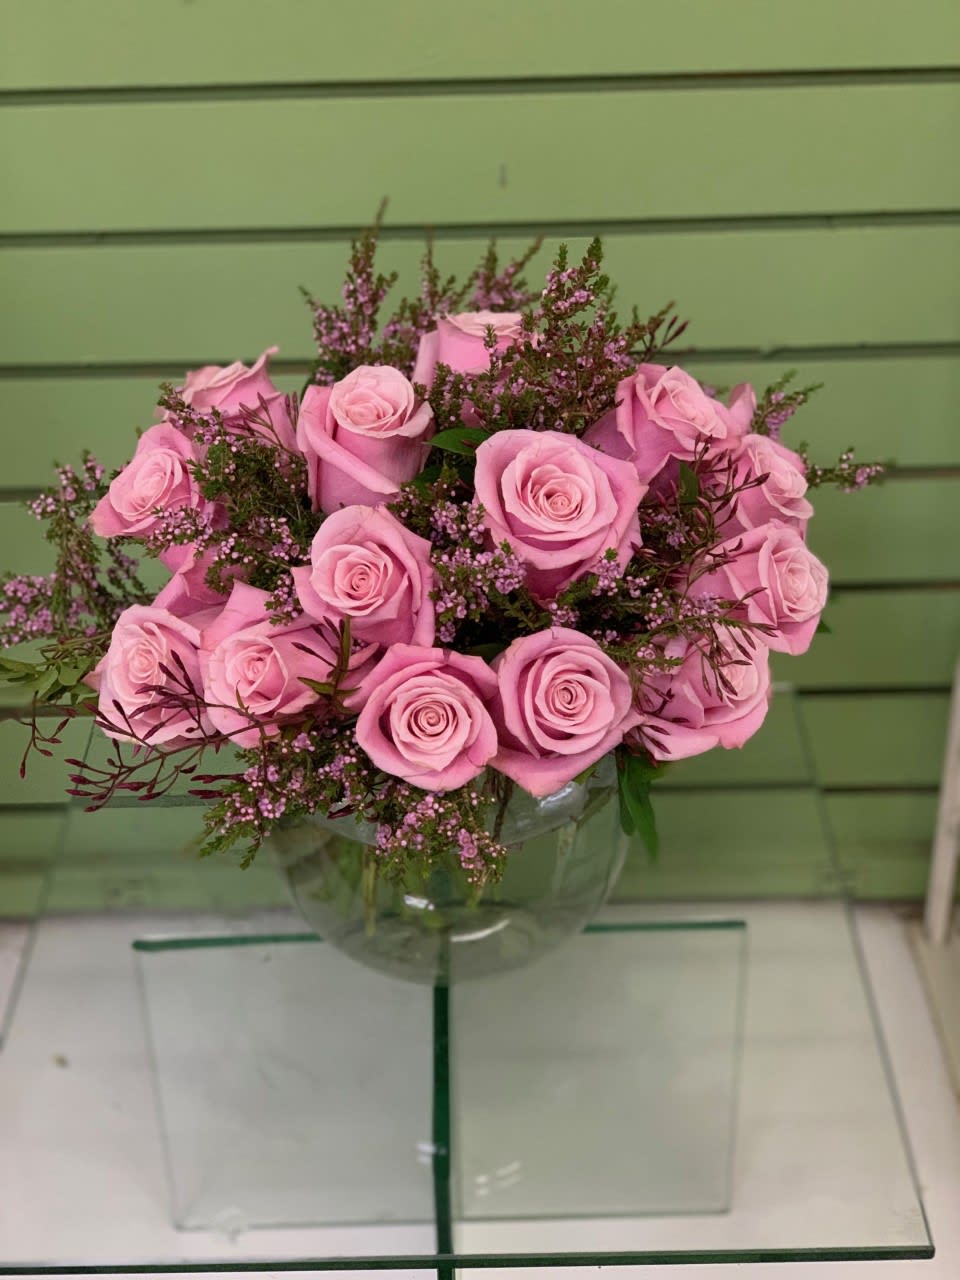 Long stemmed roses in a classic European hand-tied bouquet accented with foliage